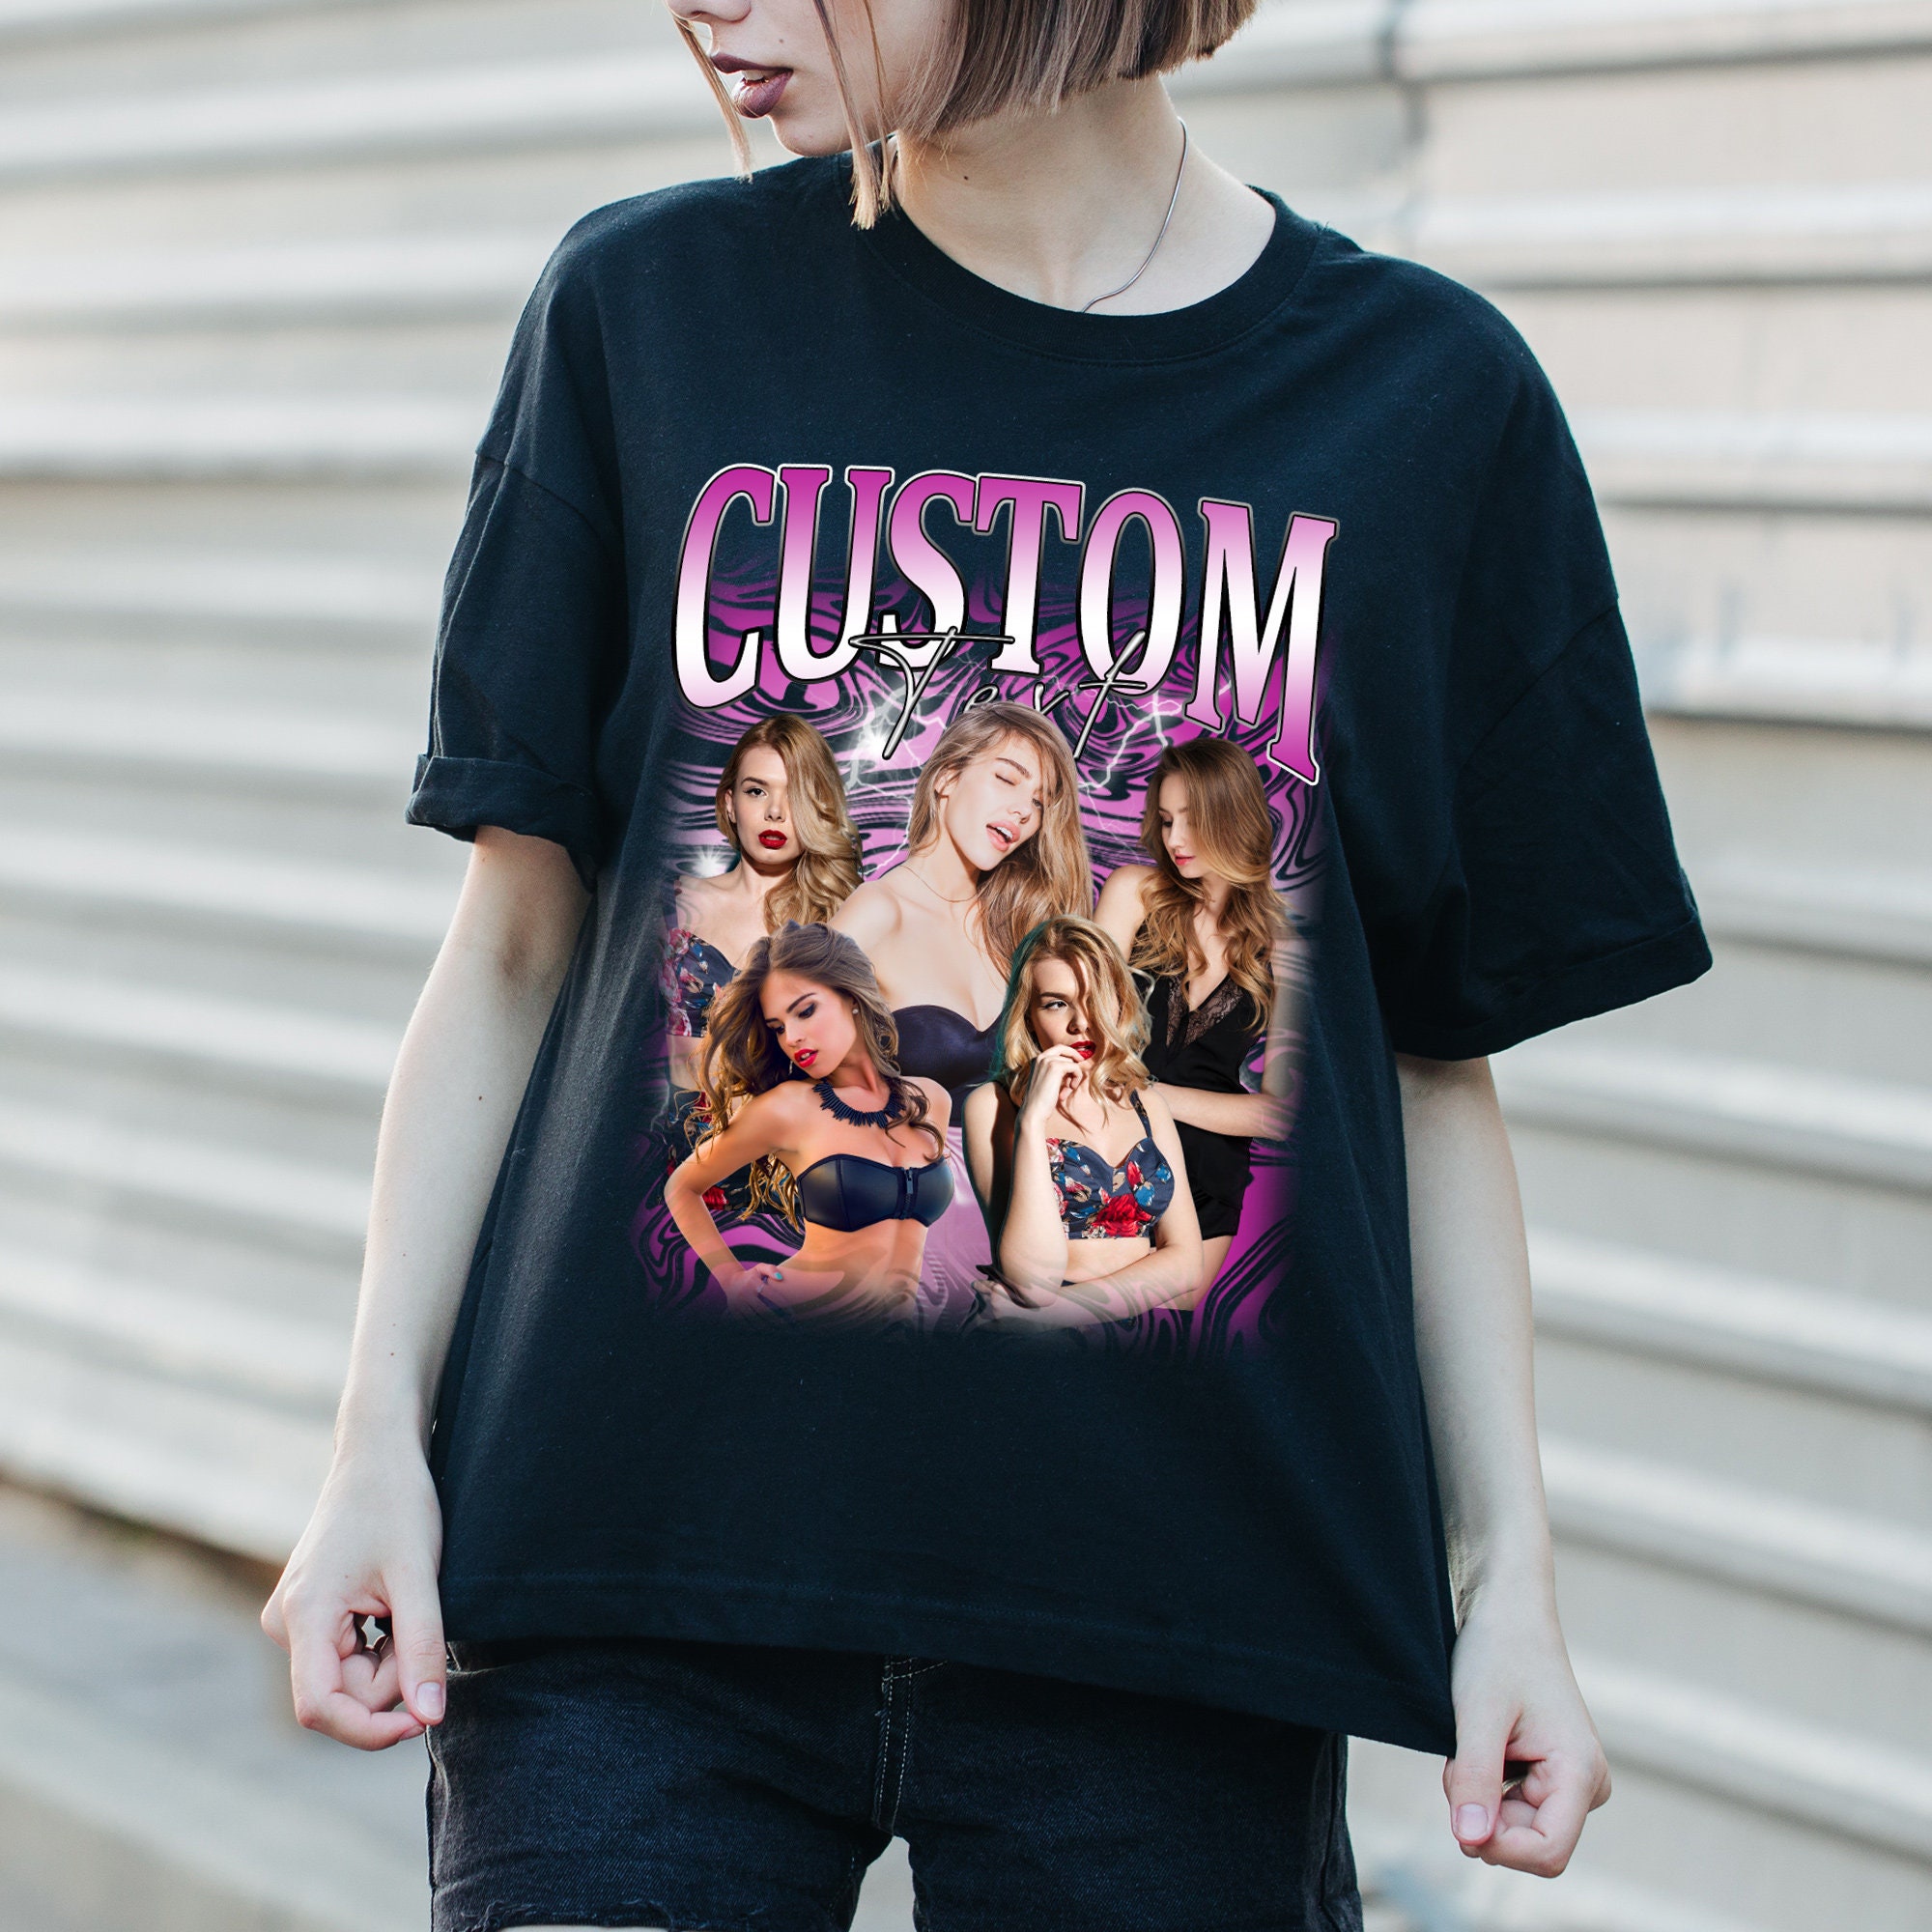 Personalized Bootleg Rap Shirt, Personalized 90s Vintage Shirts with Photos